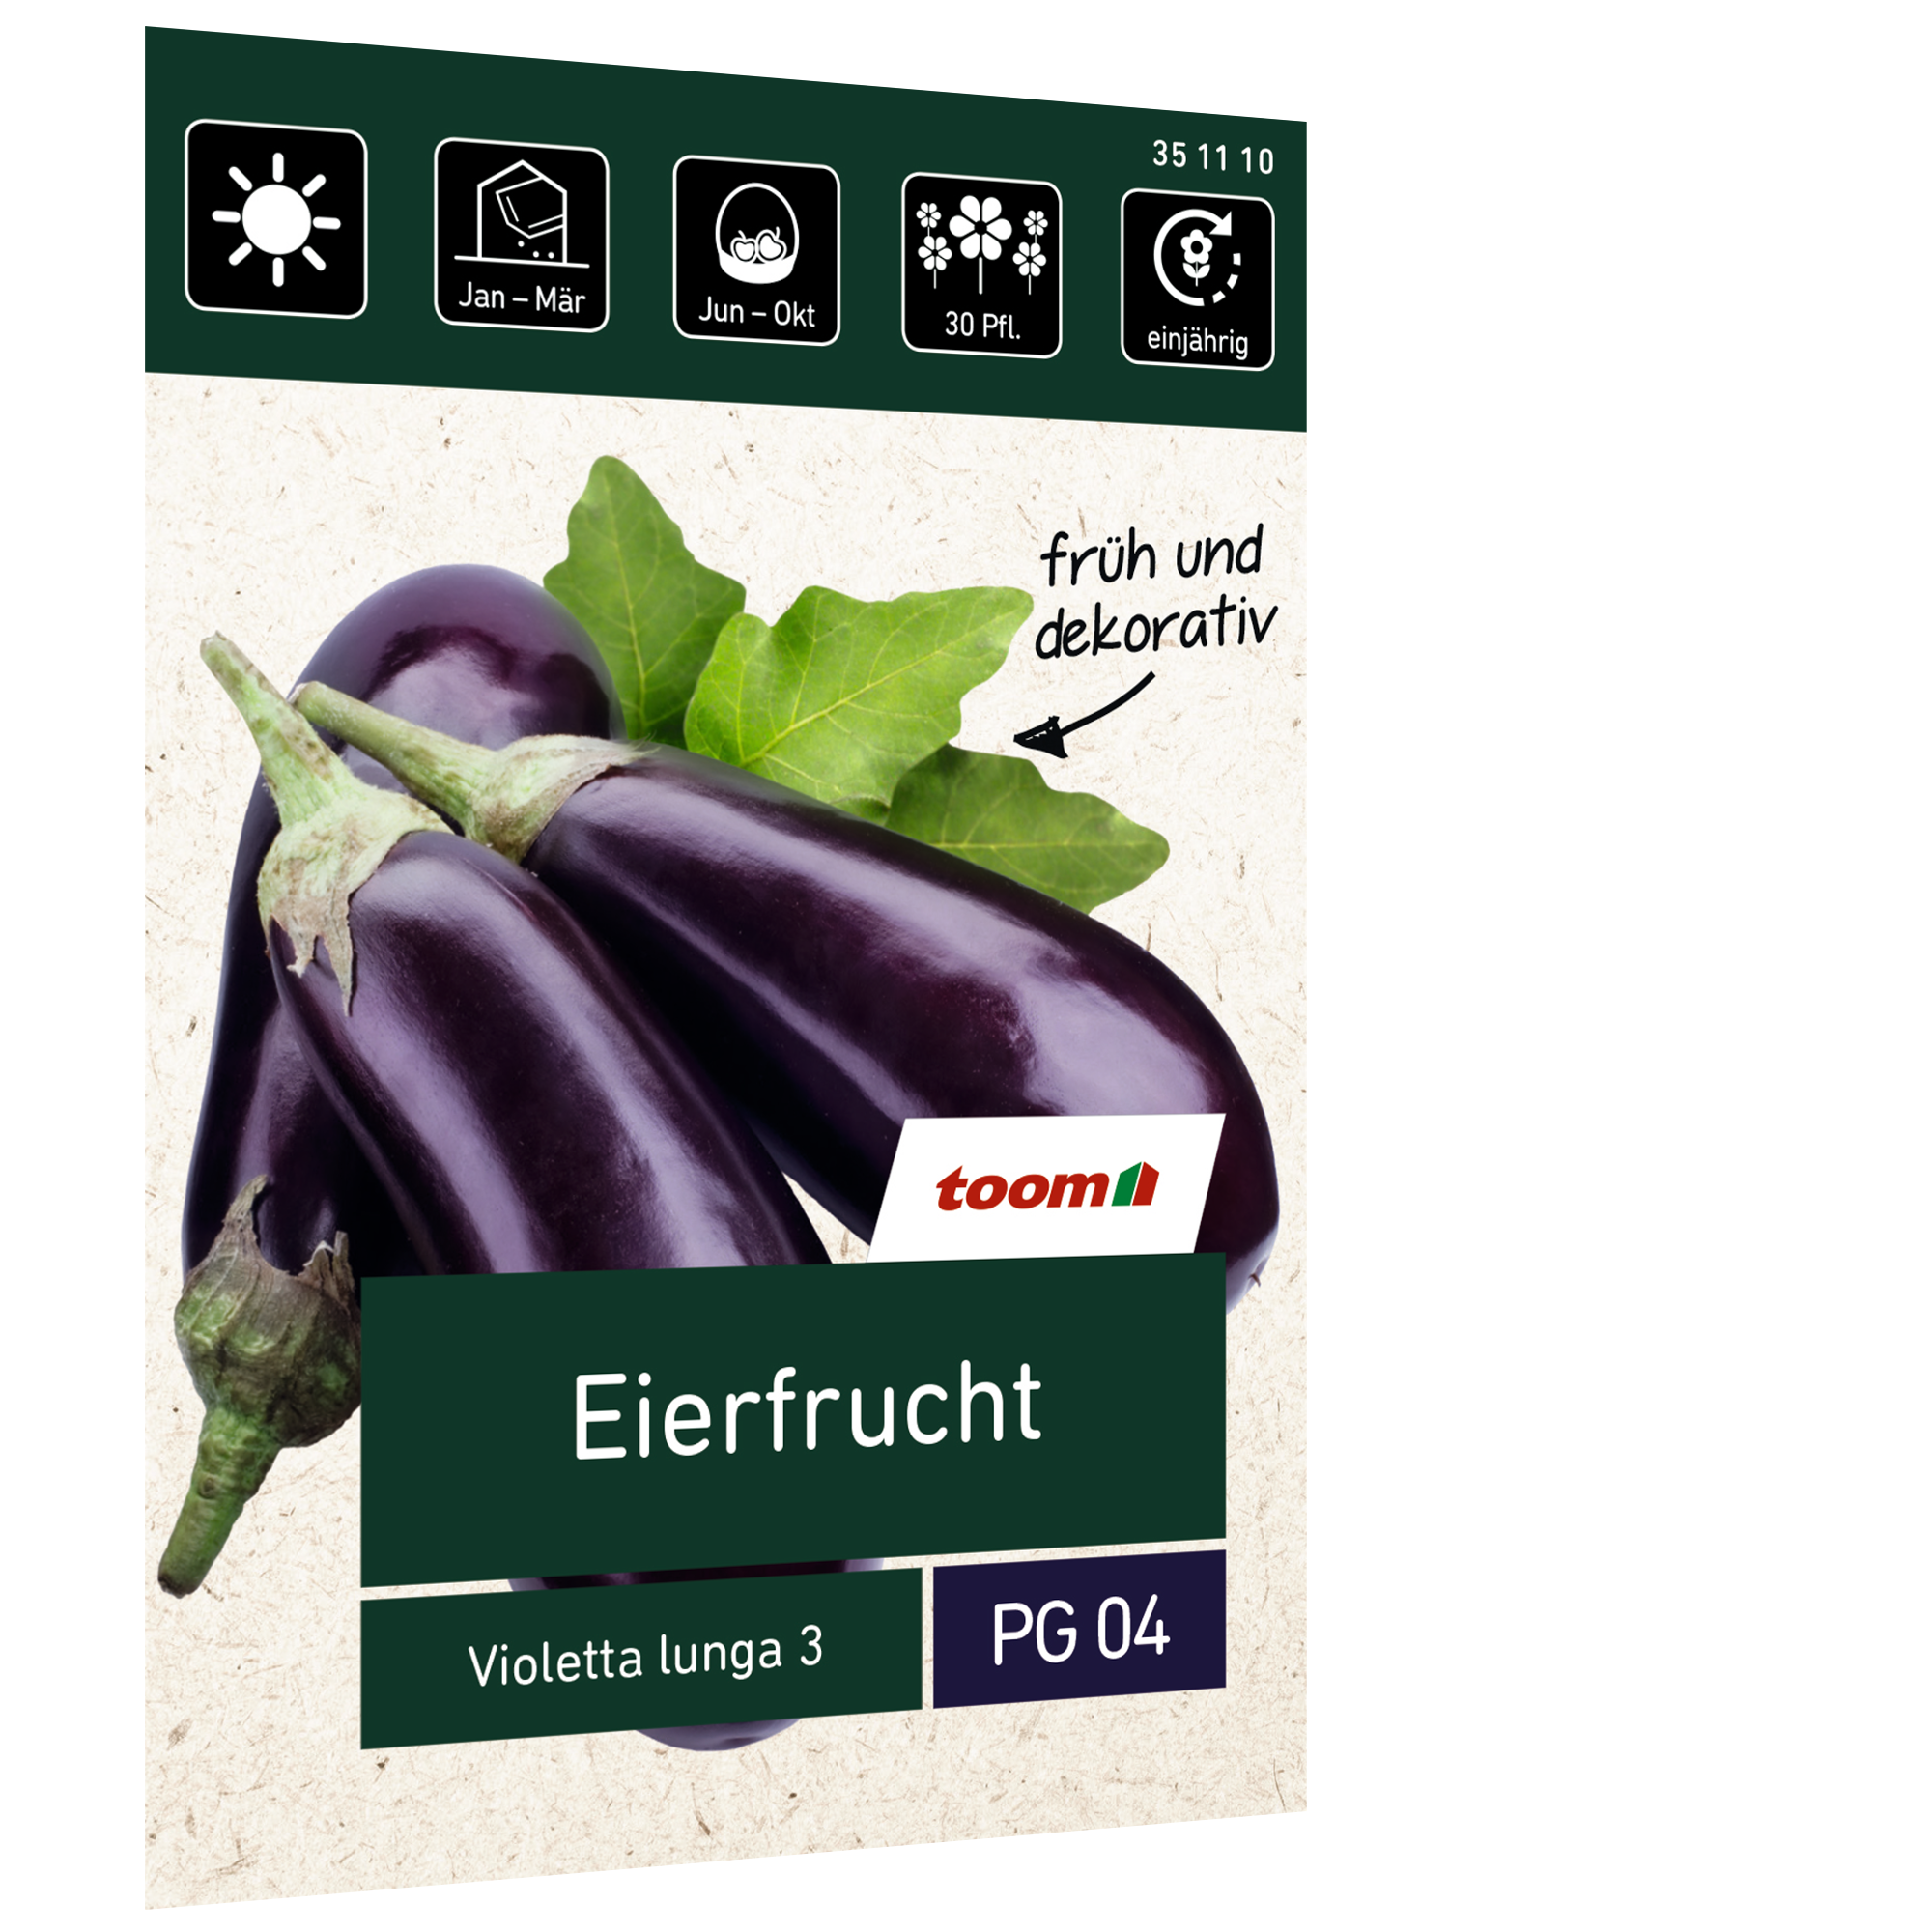 Eierfrucht 'Violetta lunga 3' + product picture